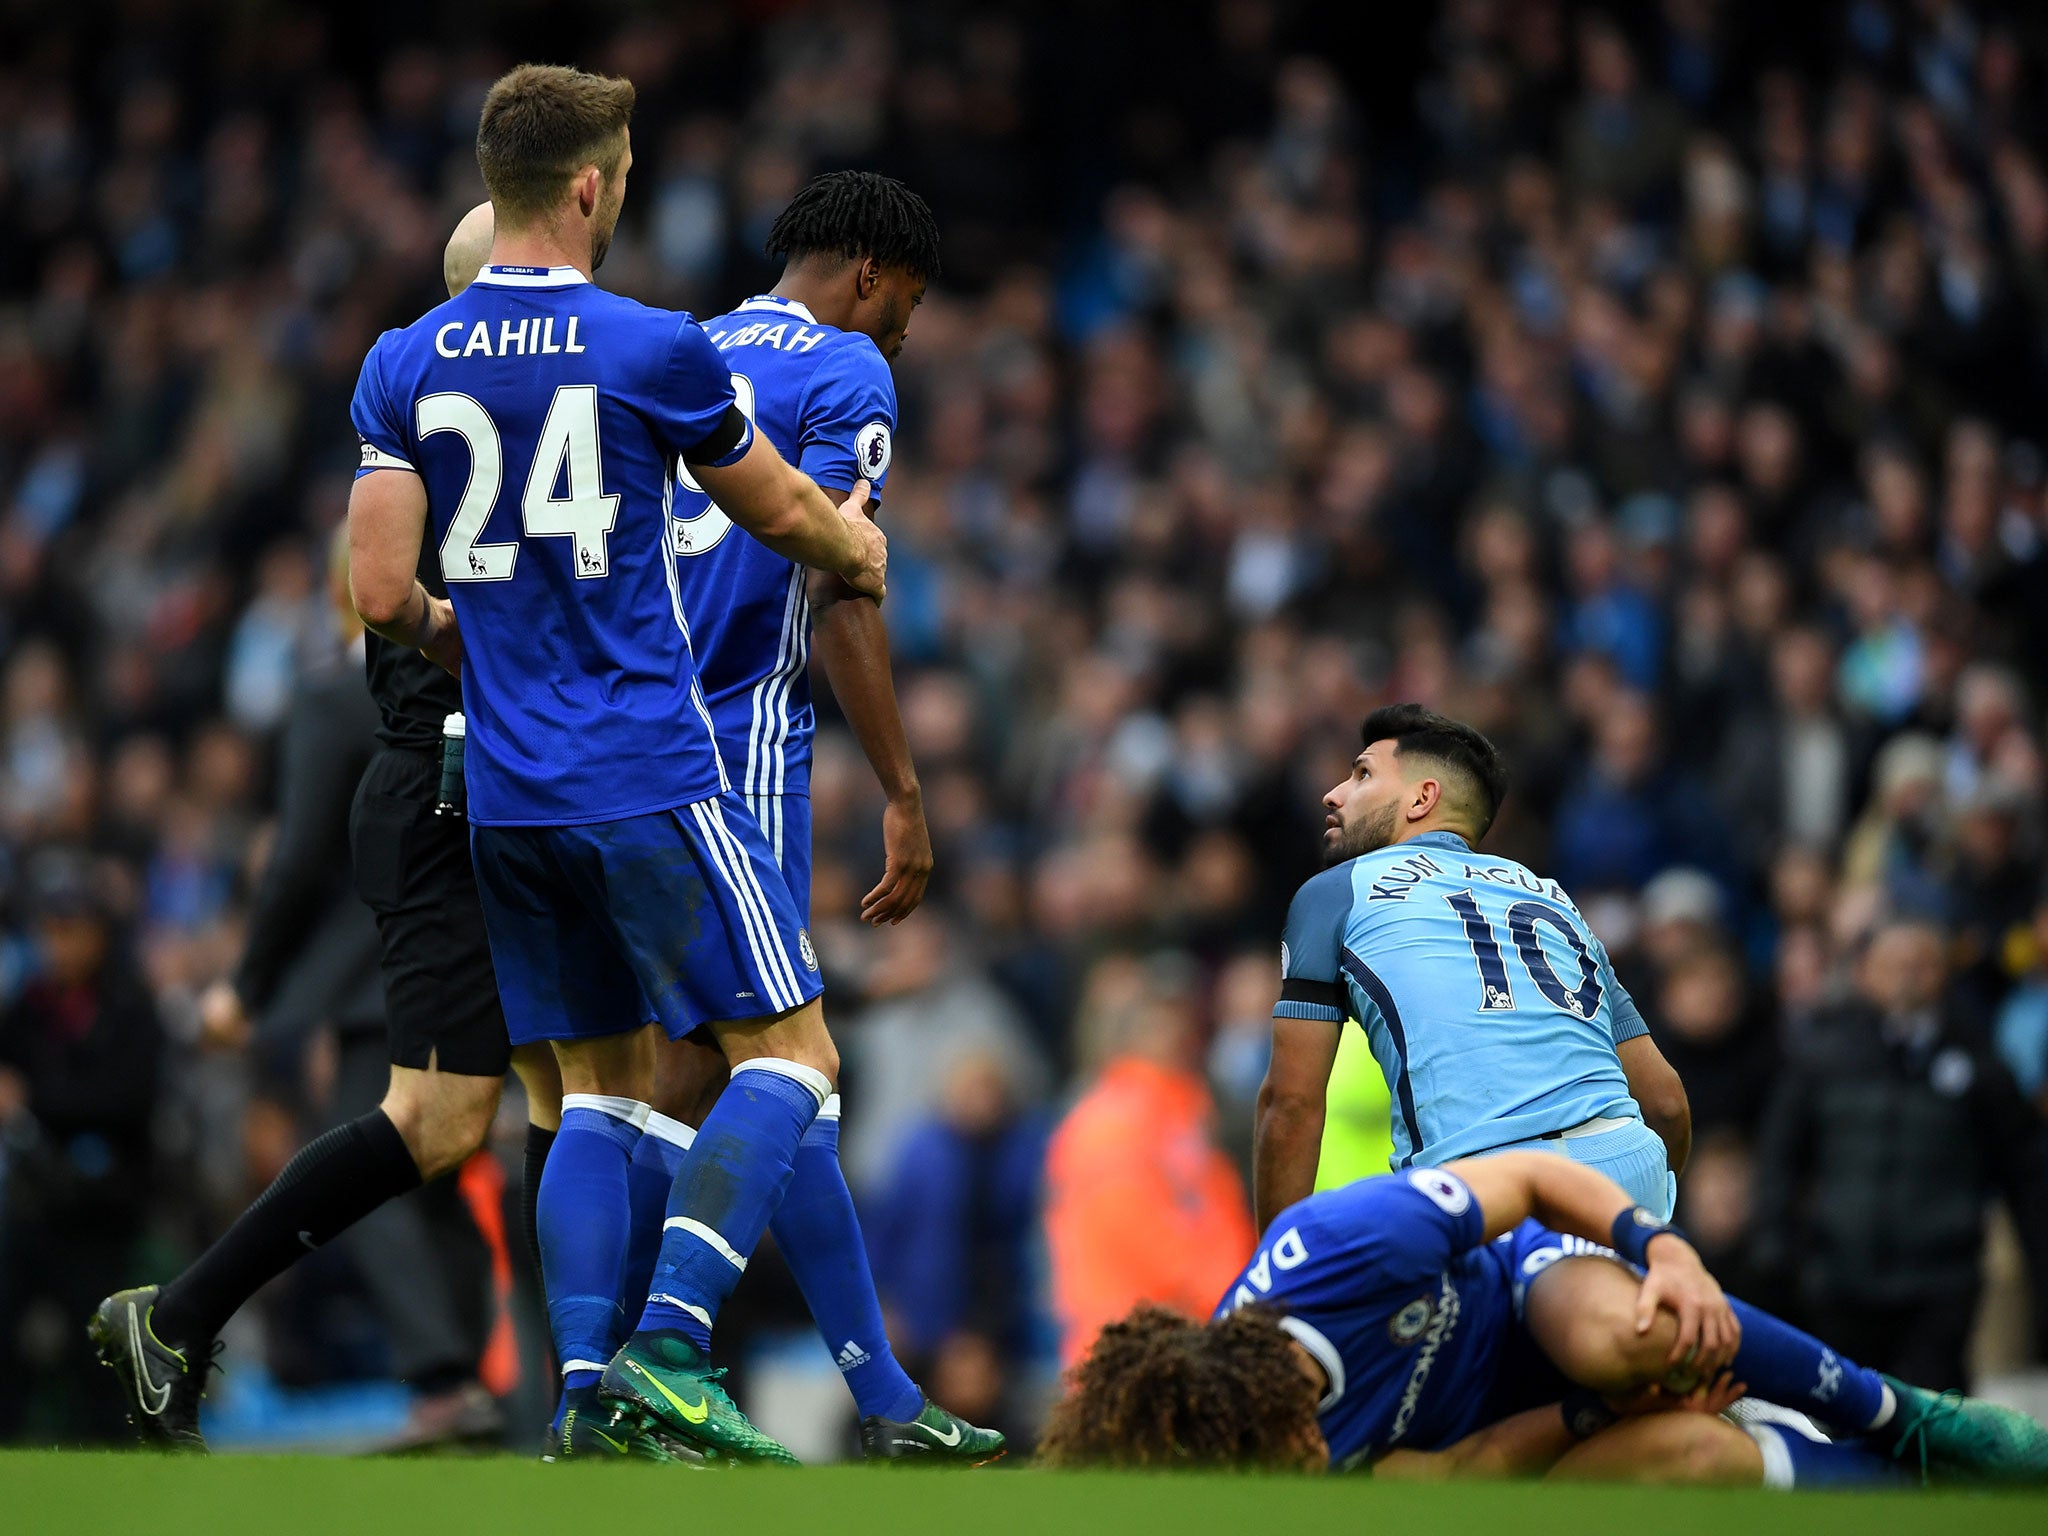 Chelsea's players rush to confront Aguero after his dangerous tackle on David Luiz